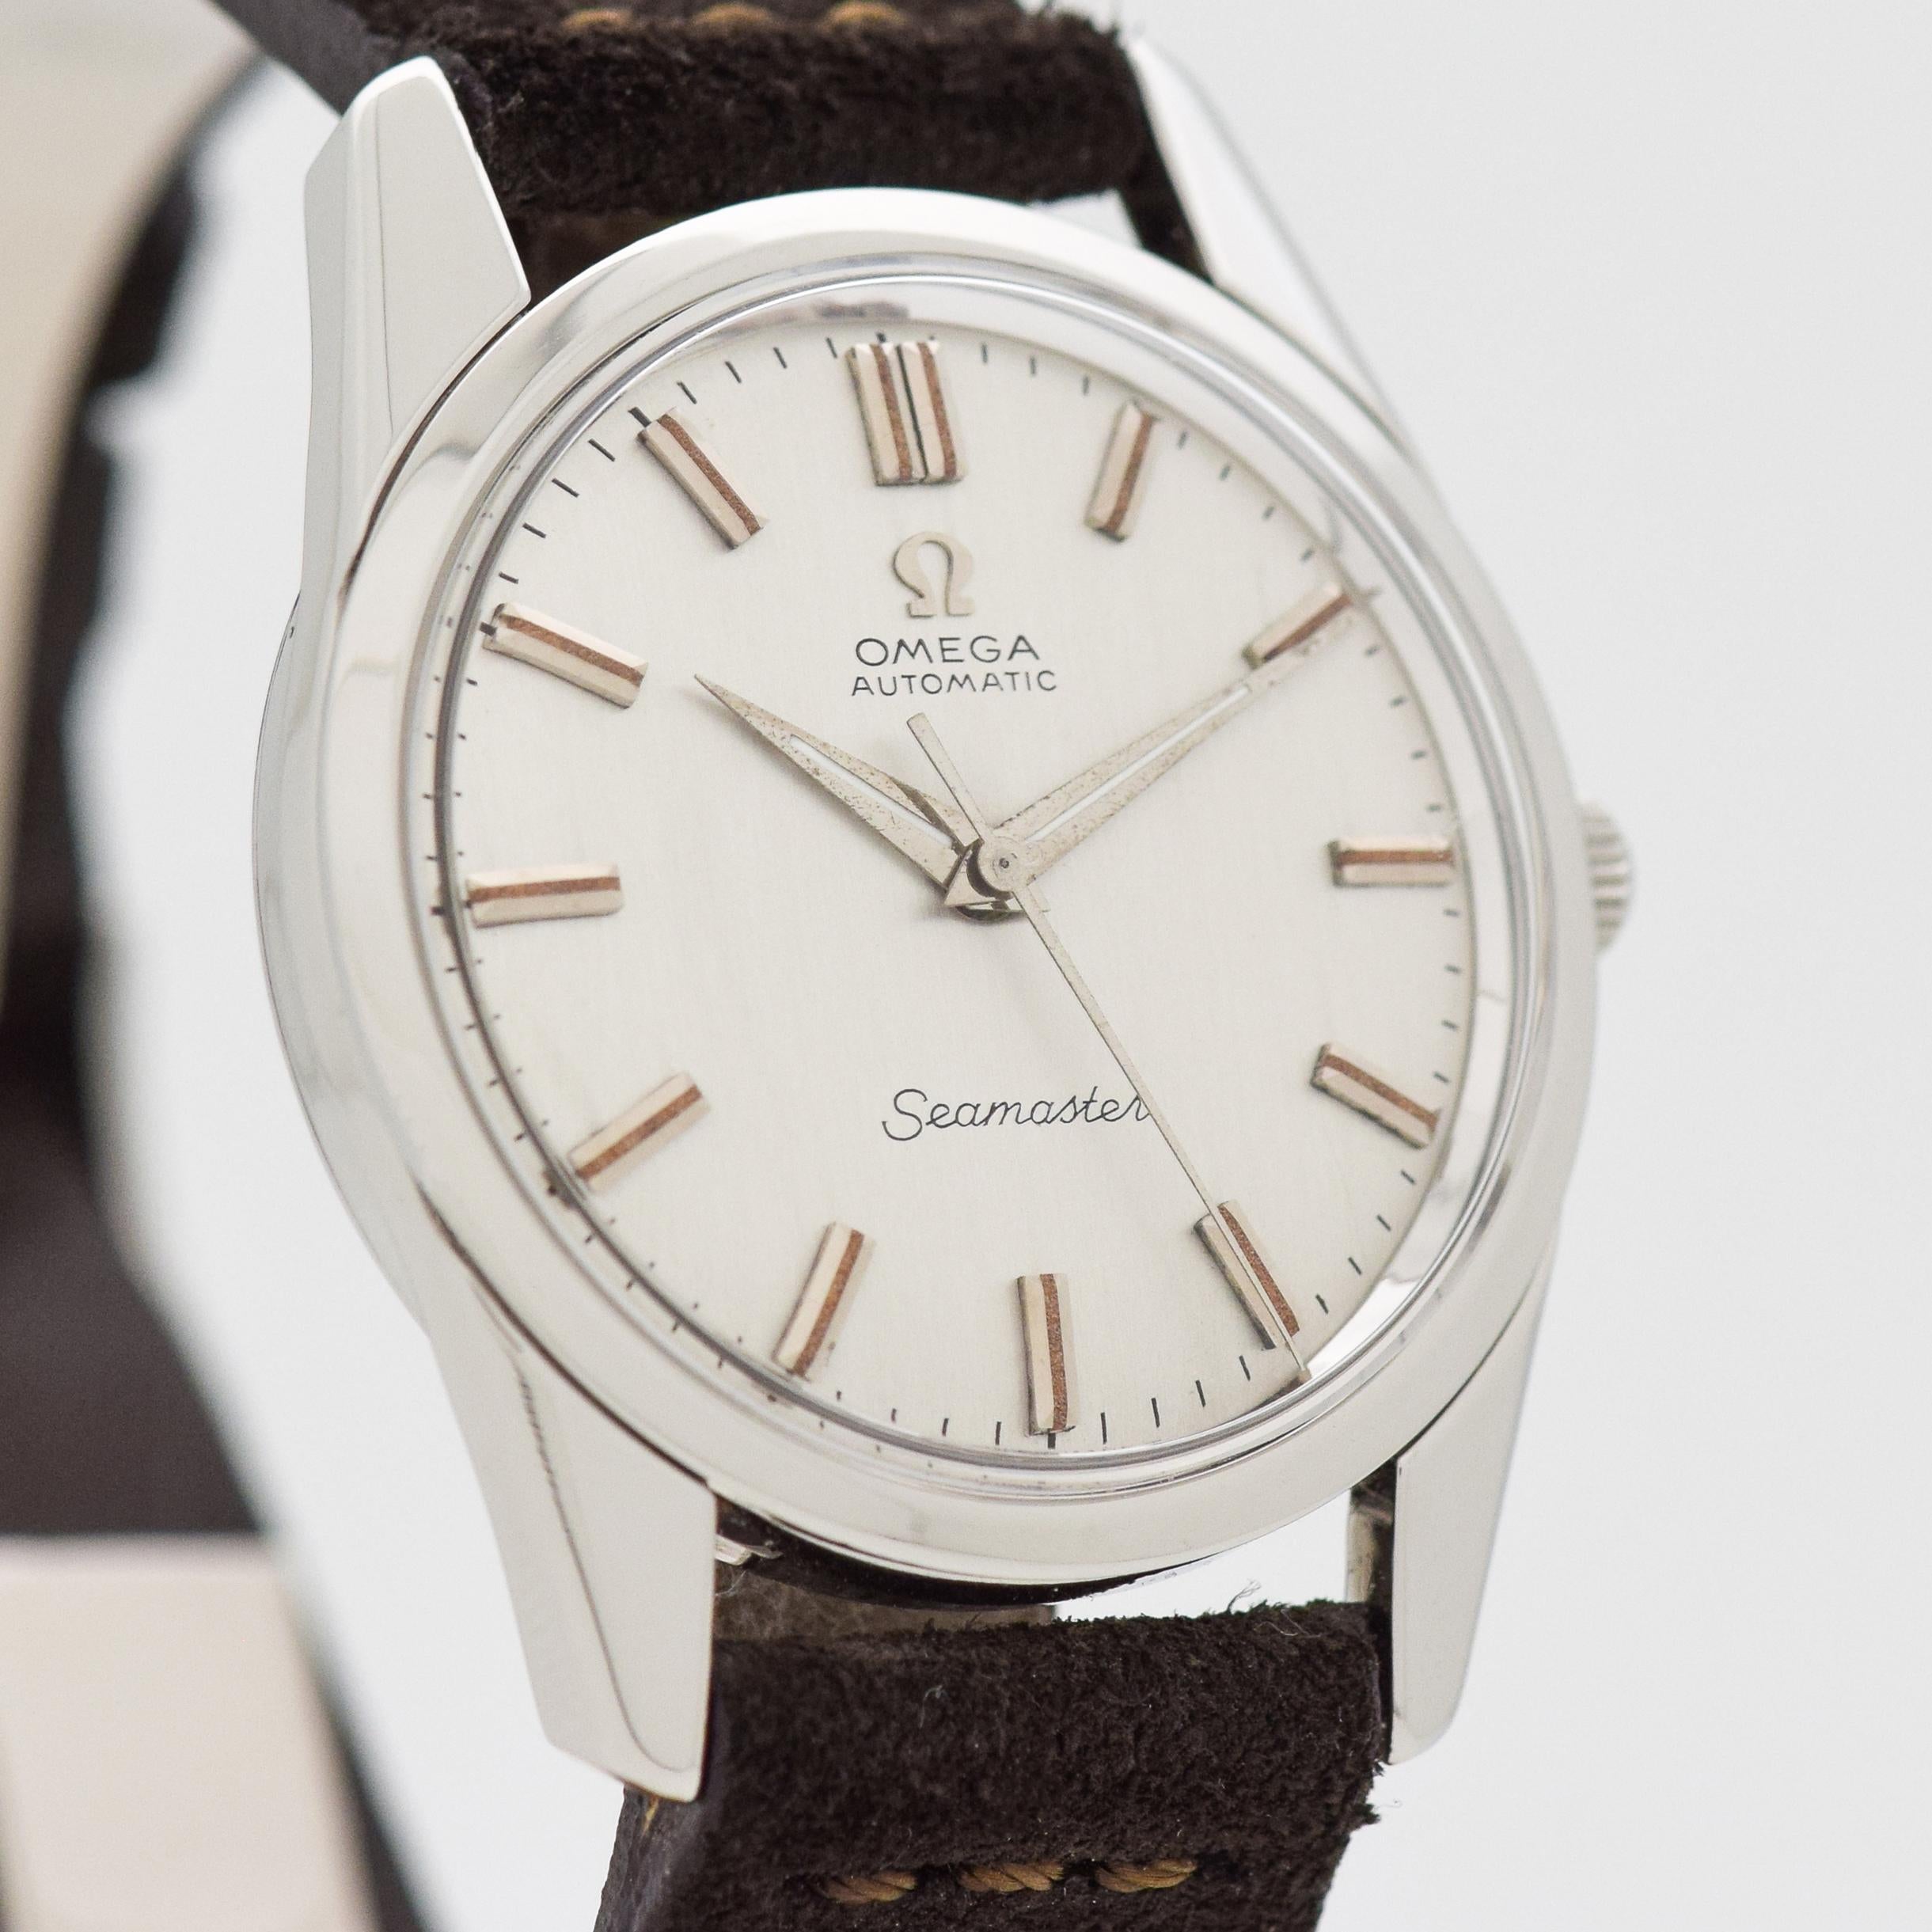 1959 Vintage Omega Seamaster Automatic Ref. 14700 2 SC Stainless Steel watch with Original Silver Dial with Applied Steel Beveled Stick/Bar/Baton Markers. 33mm x 41mm lug to lug (1.3 in. x 1.61 in.) - 24 jewel, automatic caliber movement. Sueded